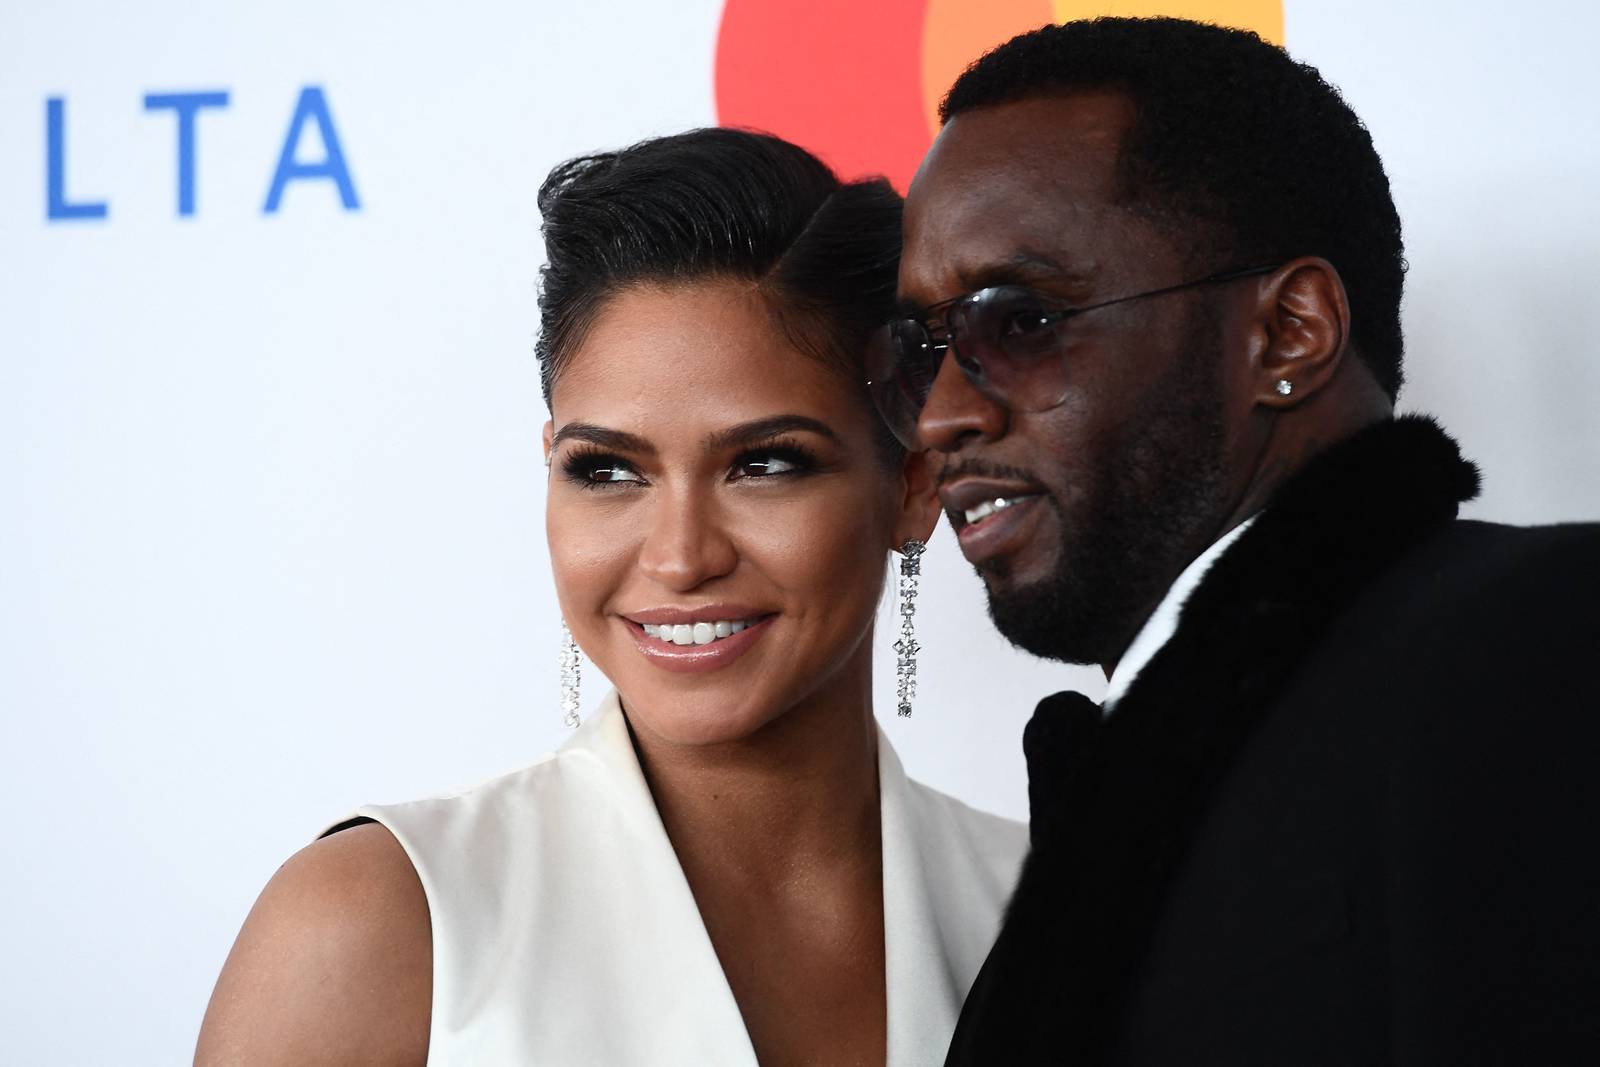 Sean Diddy Combs Facing Assault Accusations From Singer Cassie